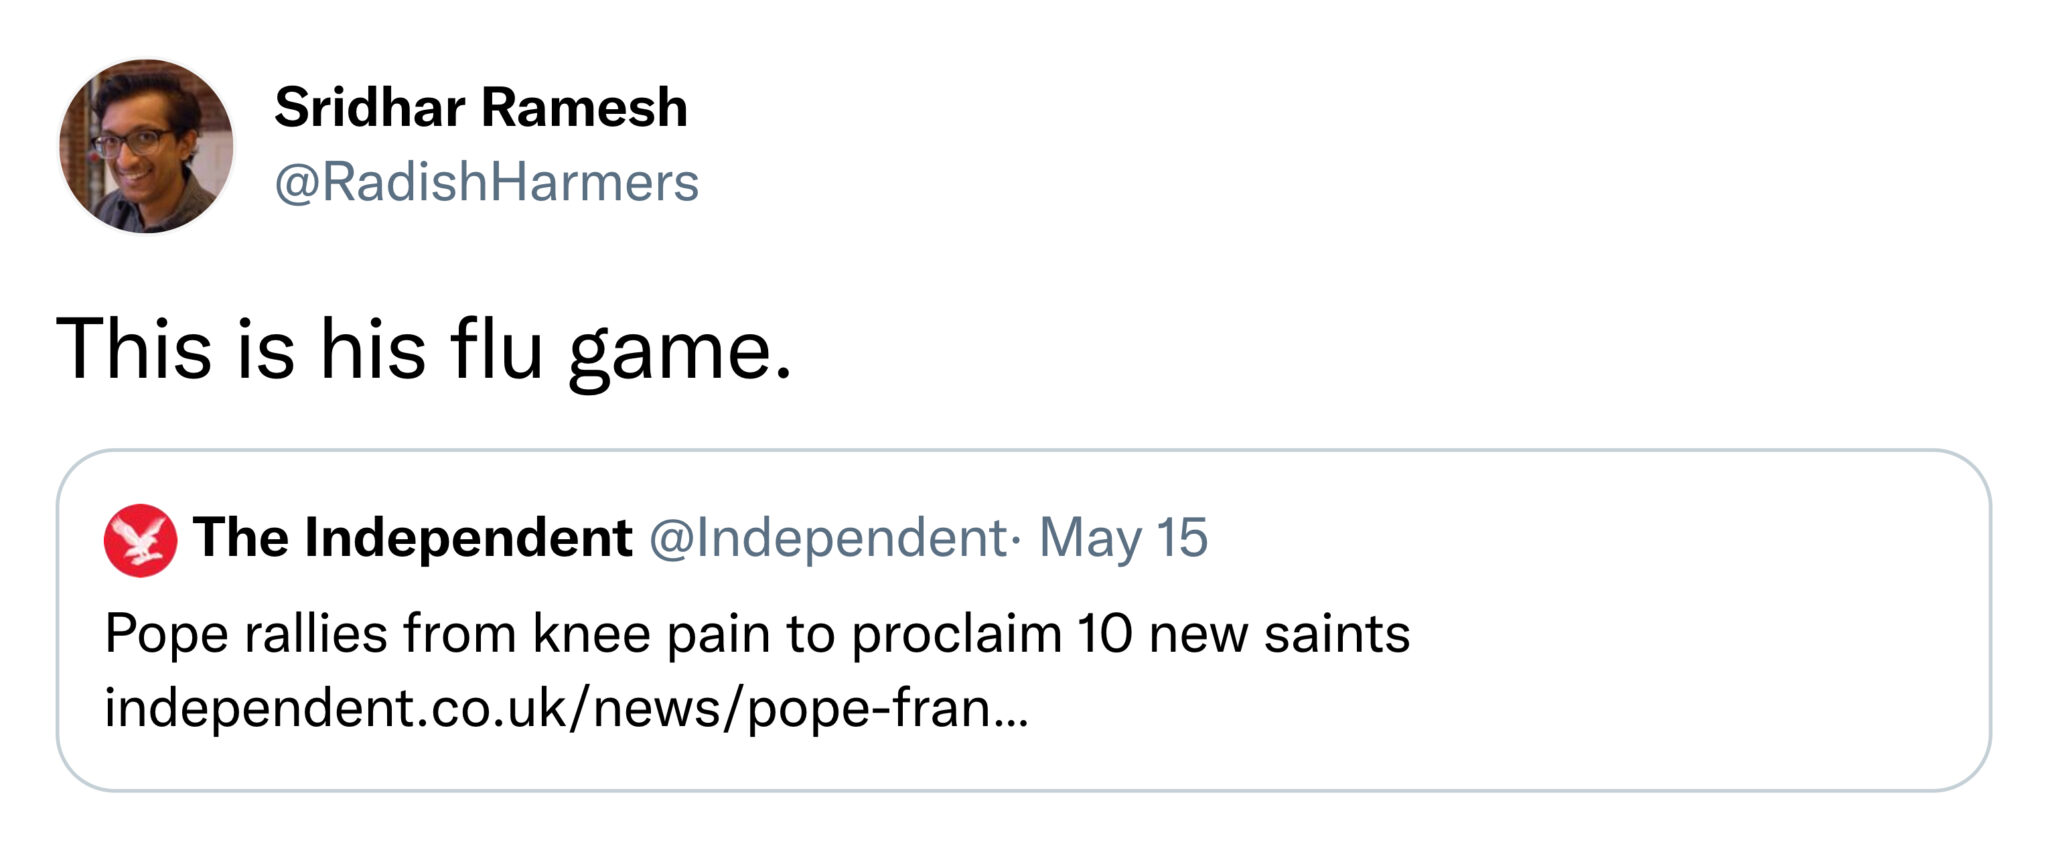 funny tweets and memes -  organization - Sridhar Ramesh This is his flu game. The Independent . May 15 Pope rallies from knee pain to proclaim 10 new saints independent.co.uknewspopefran...